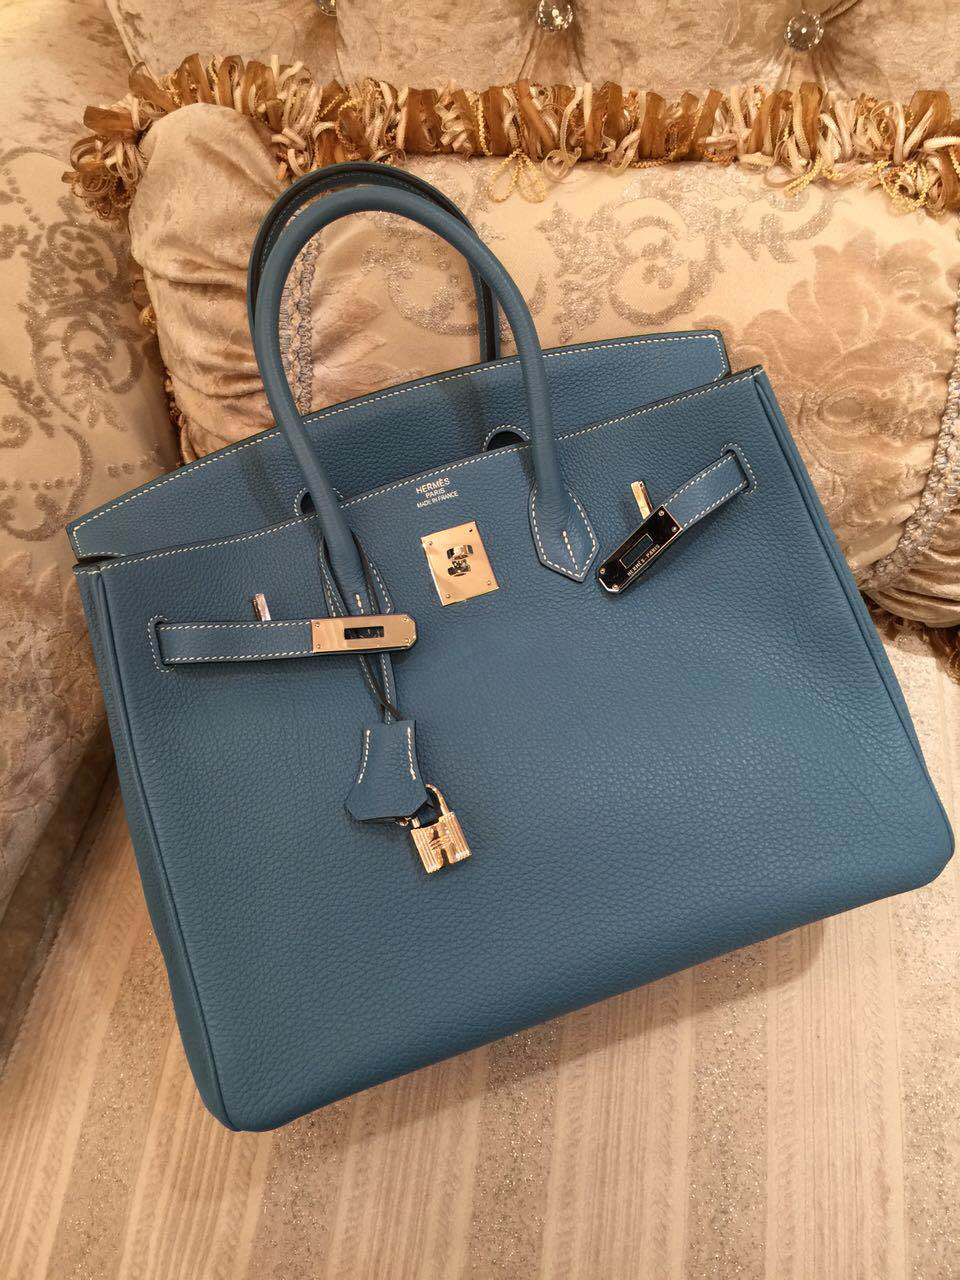 authentic hermes handbags for sale in london